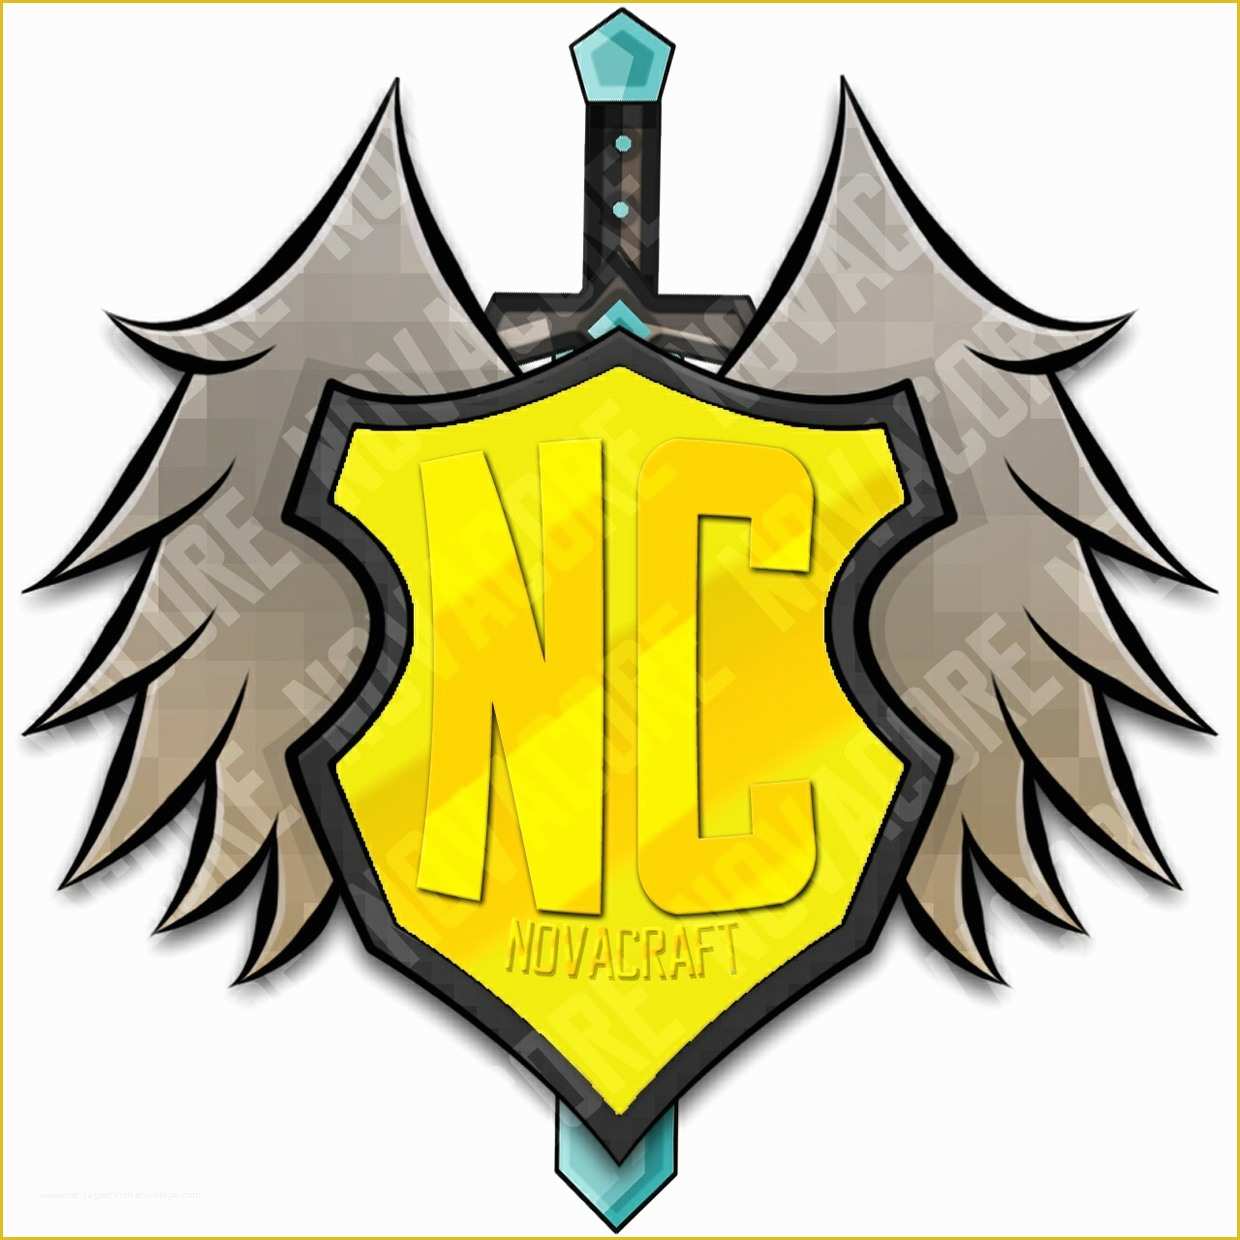 Minecraft Server Logo Template Free Of Minecraft Server Logo Gold Plated with Sword and Wings